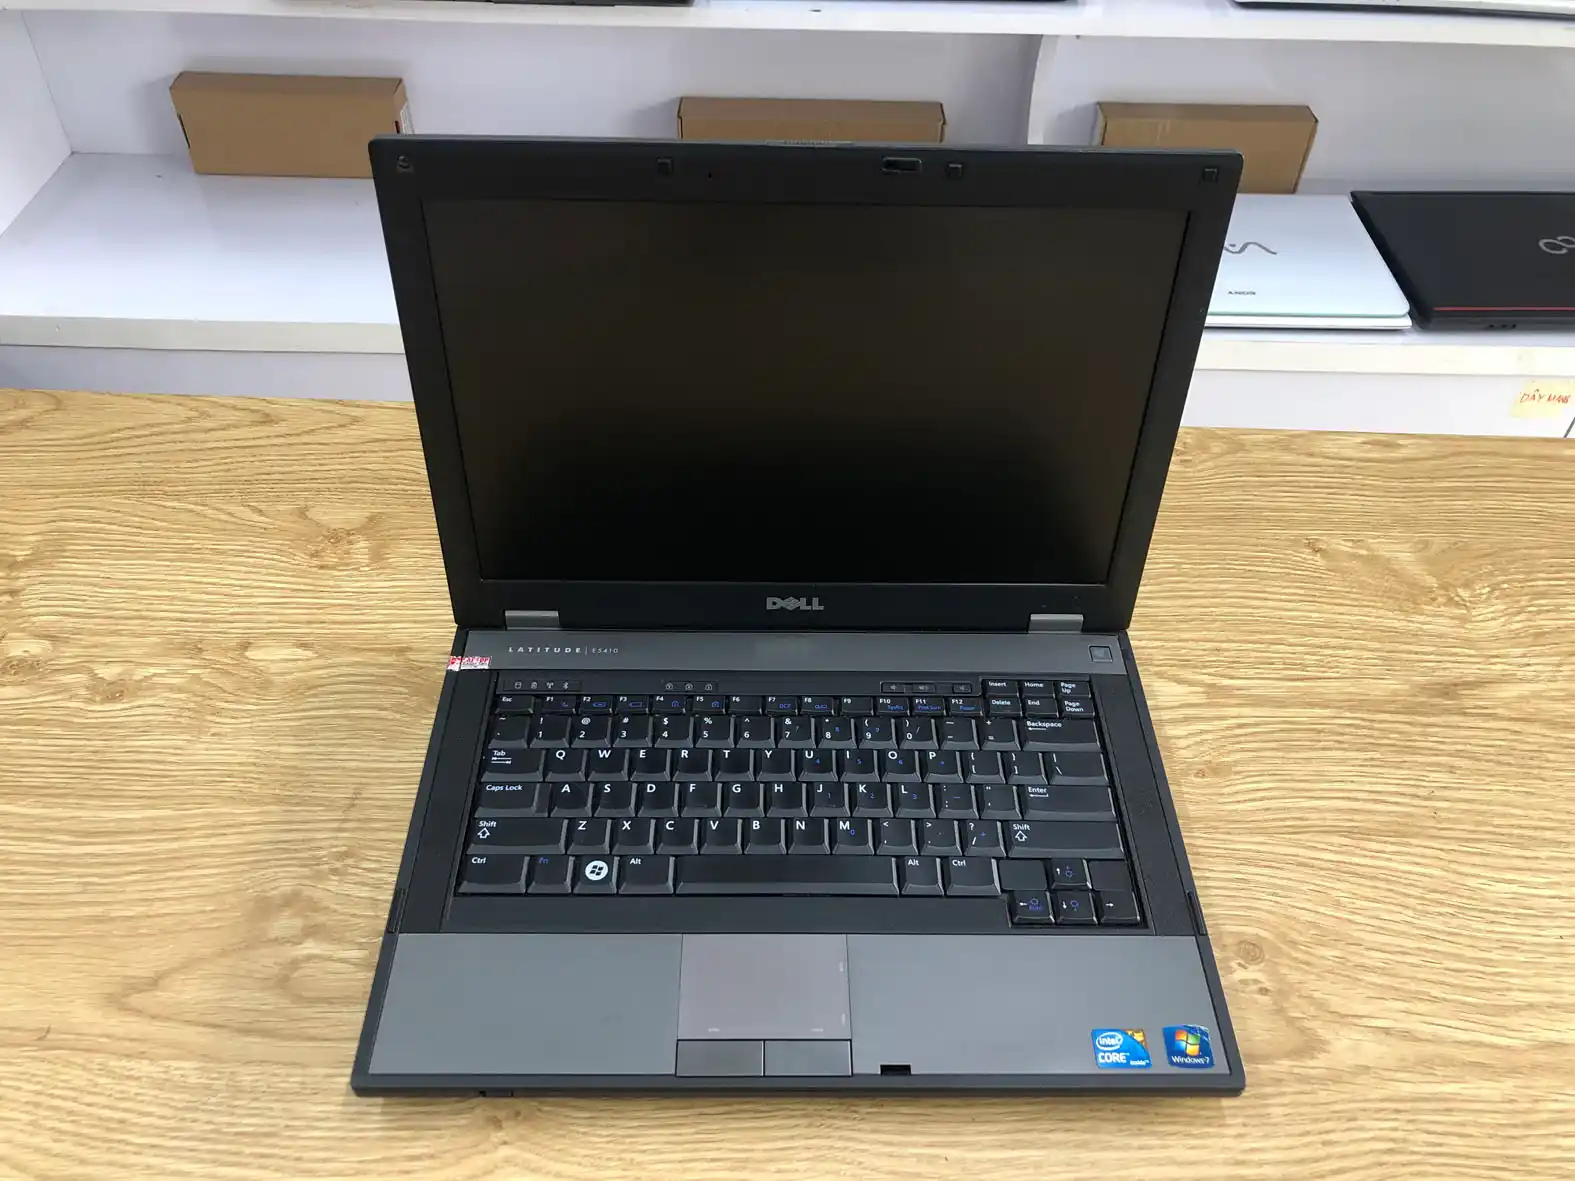 Dell Corei5 Ram 4Gb Disk 500Gb Inch 12.5 2.23Ghz 3Hrs Cahrge